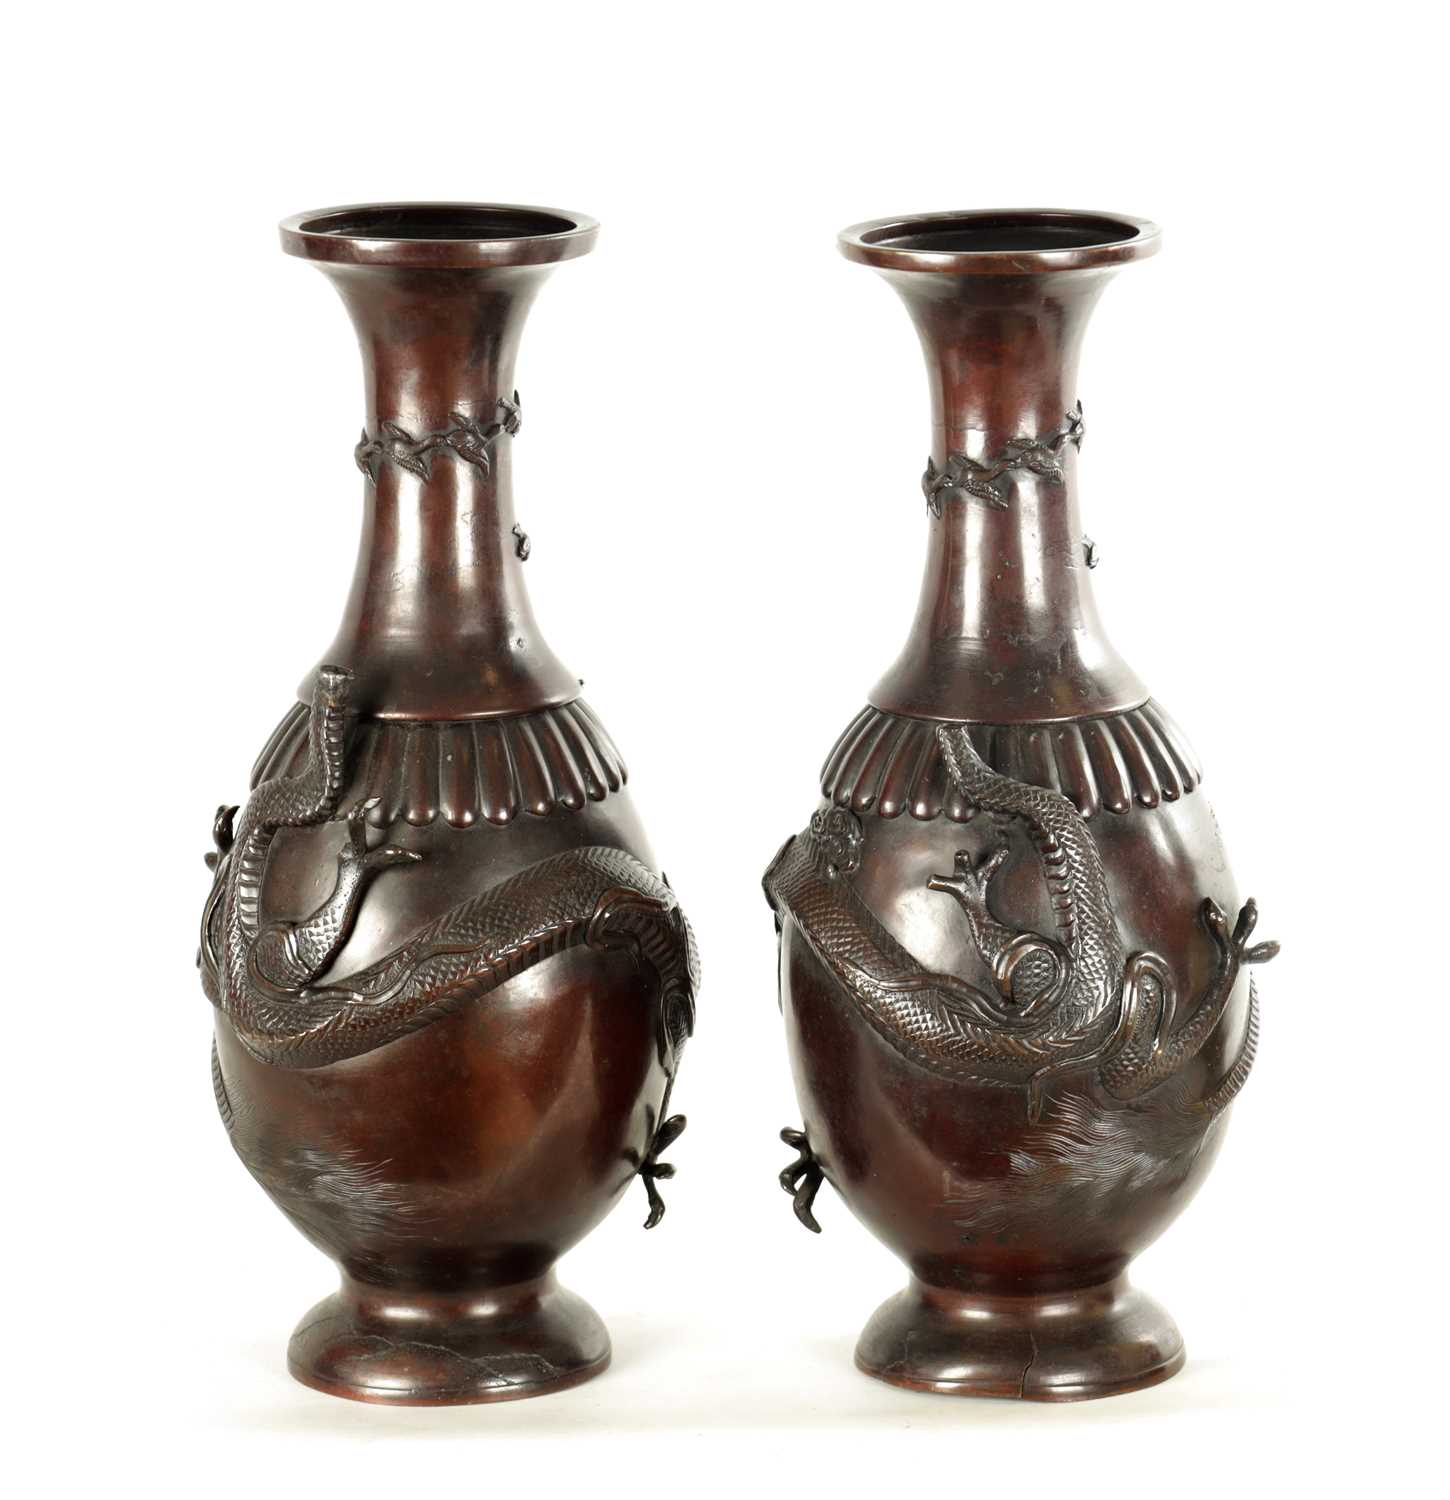 A PAIR OF TWO LATE 19TH CENTURY CHINESE BRONZE VASES